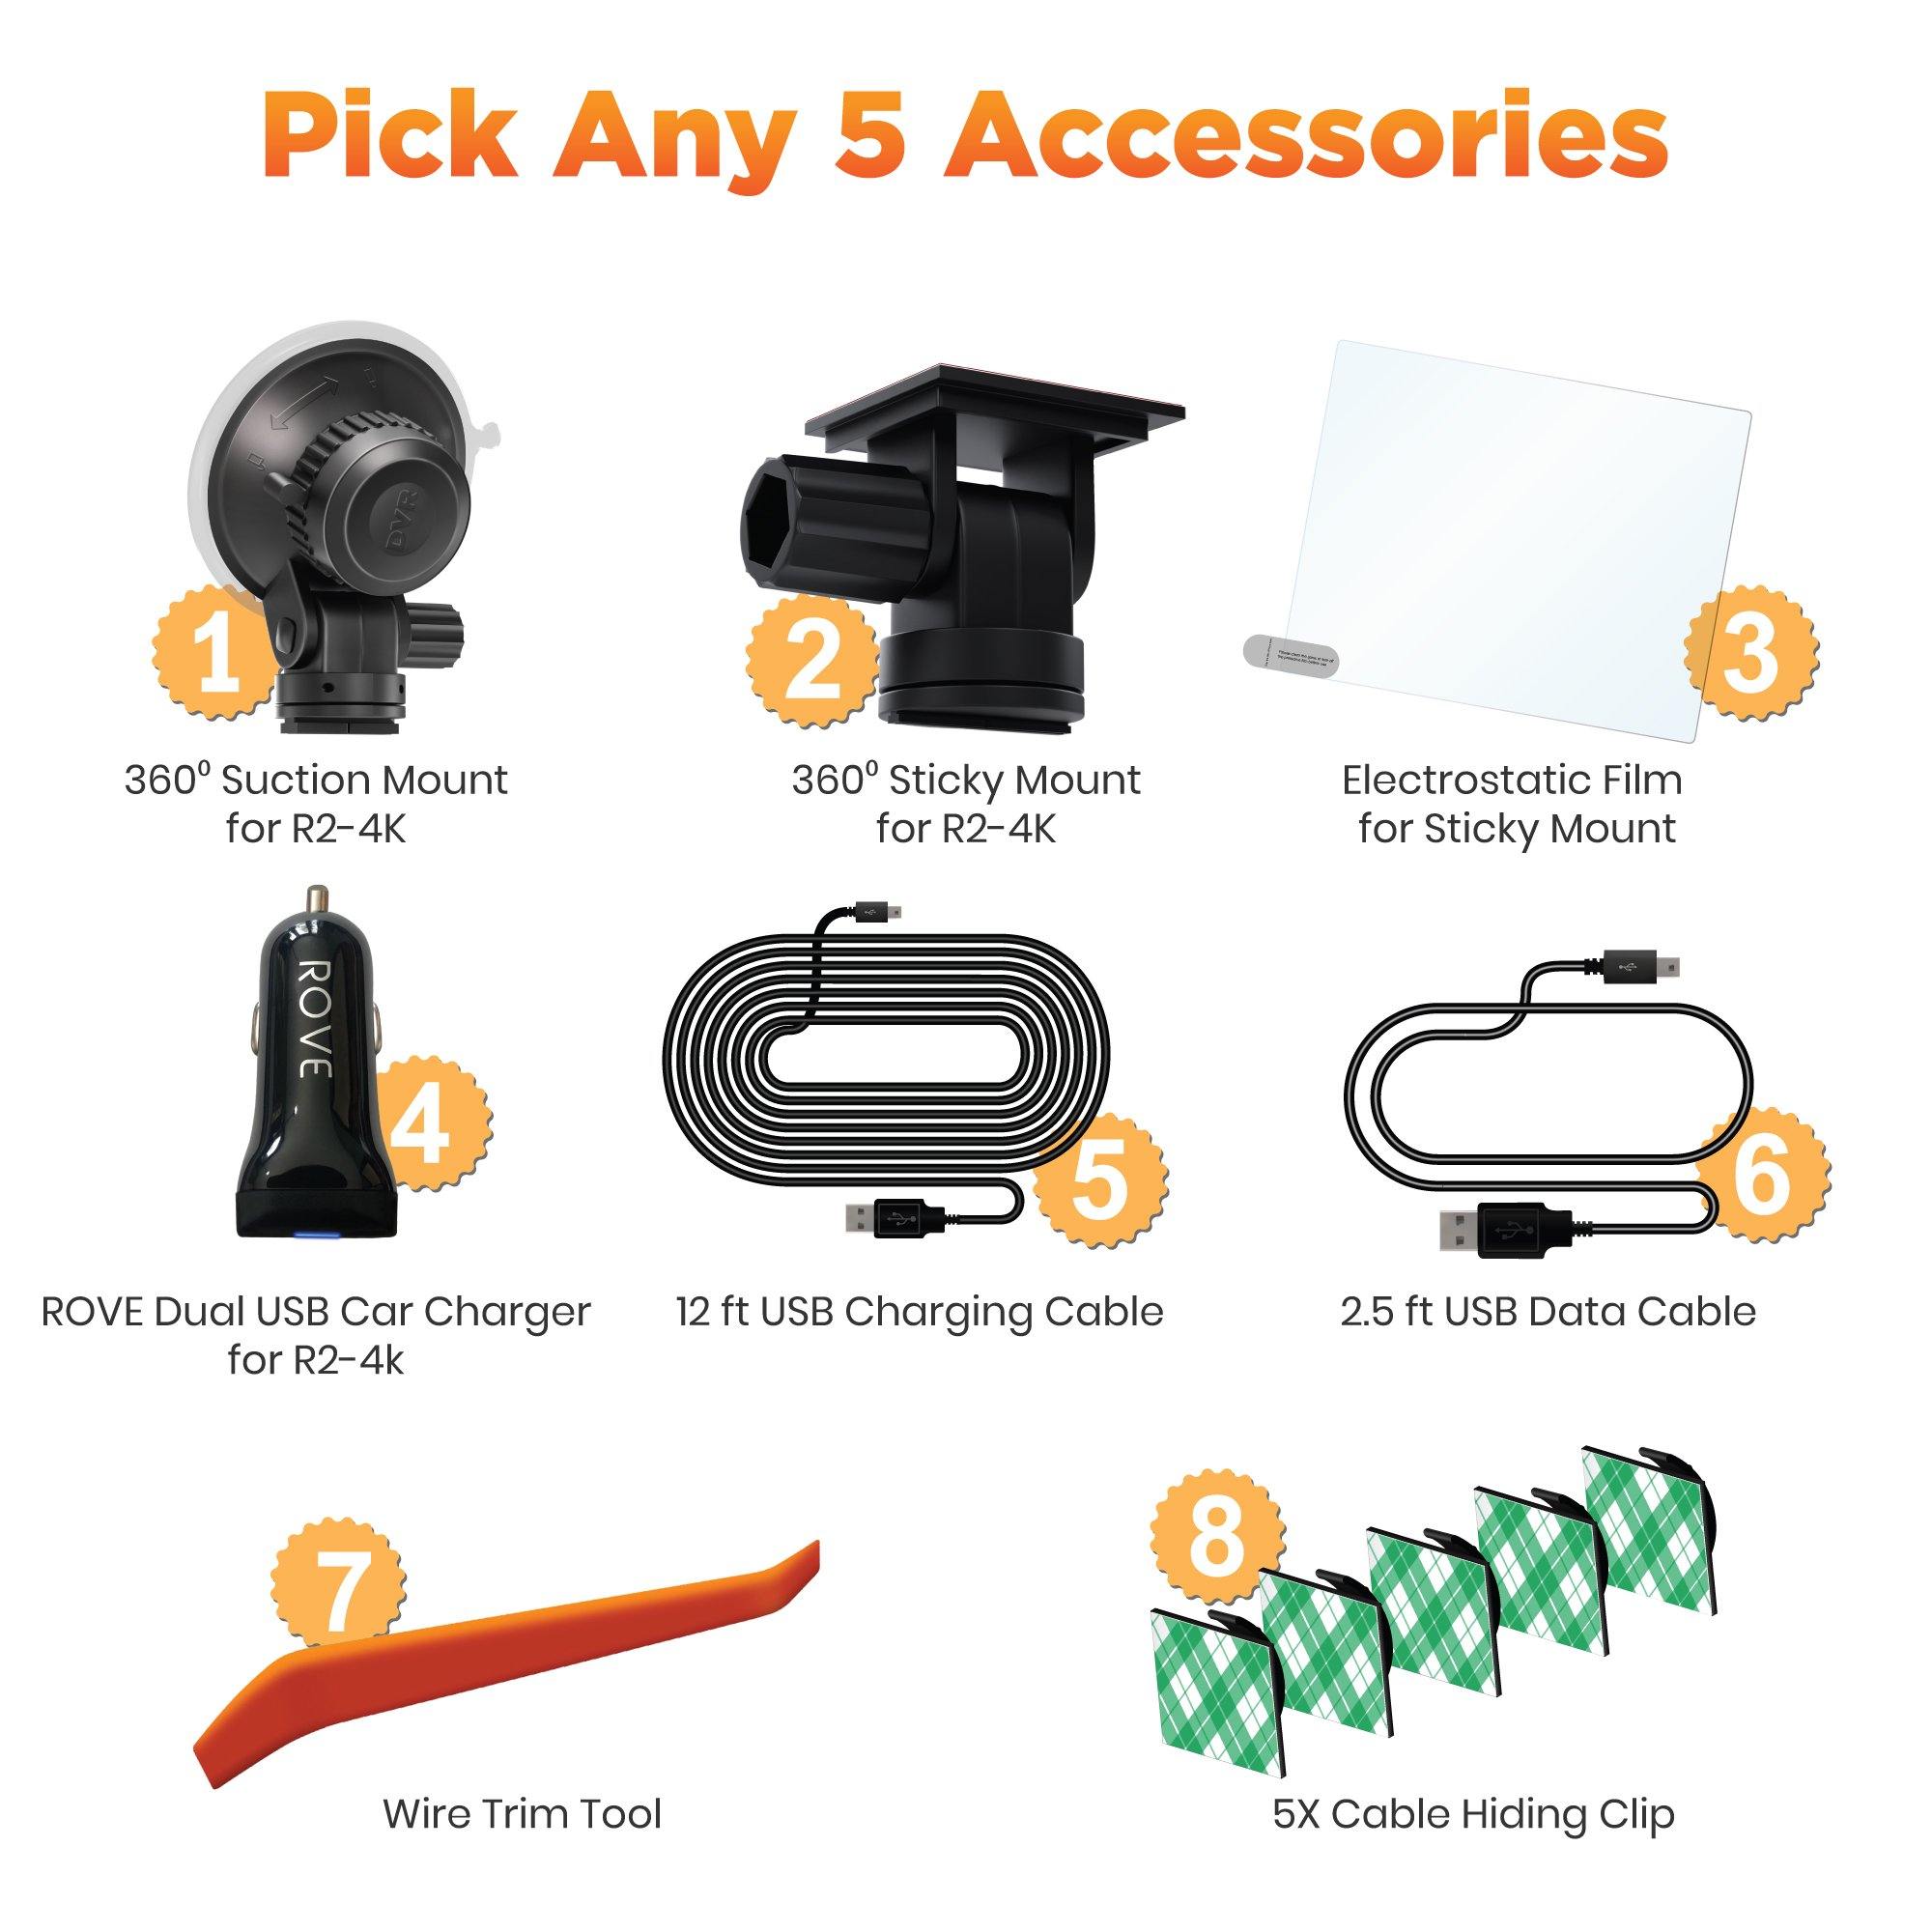 Pick Any 5 Accessories